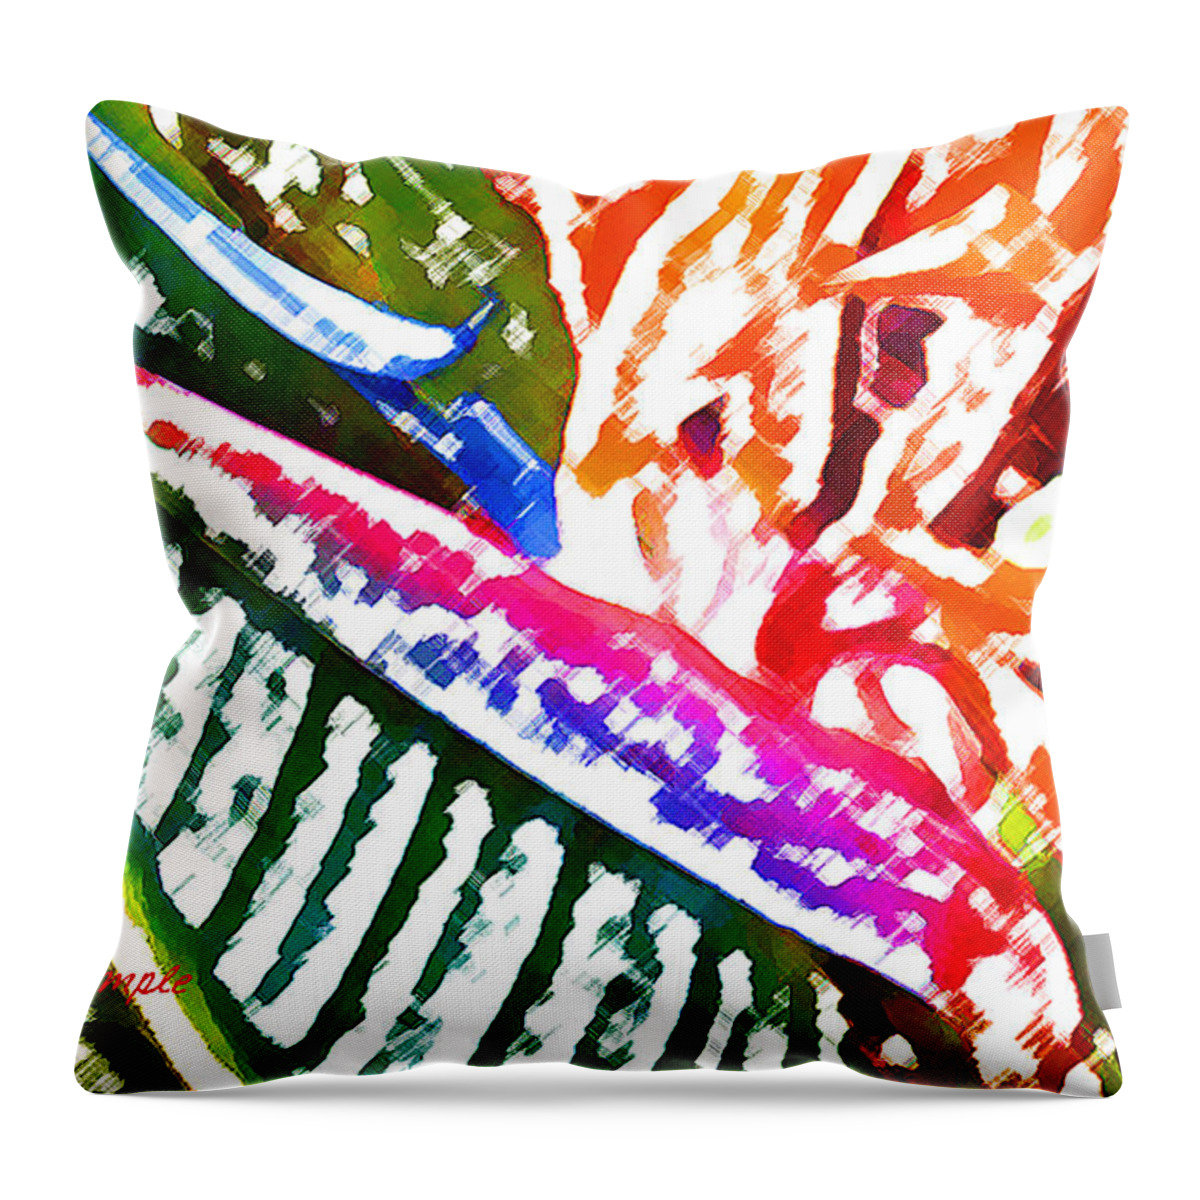 Bird Of Paradise Throw Pillow featuring the digital art Bird of Paradise Painted by James Temple